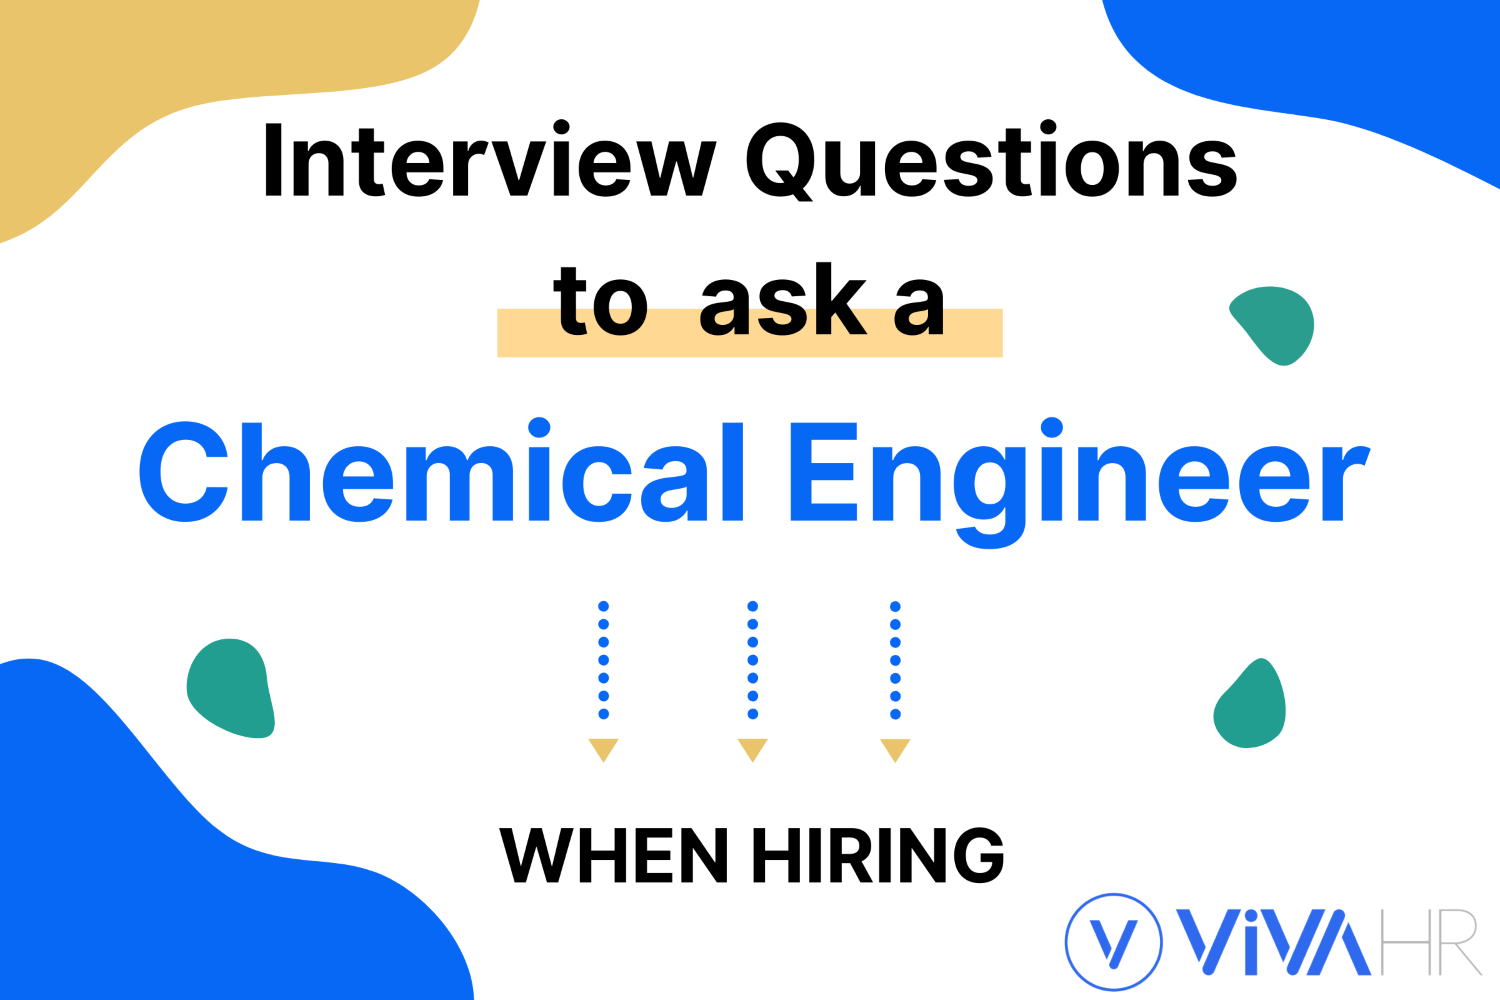 Chemical Engineer Interview Questions